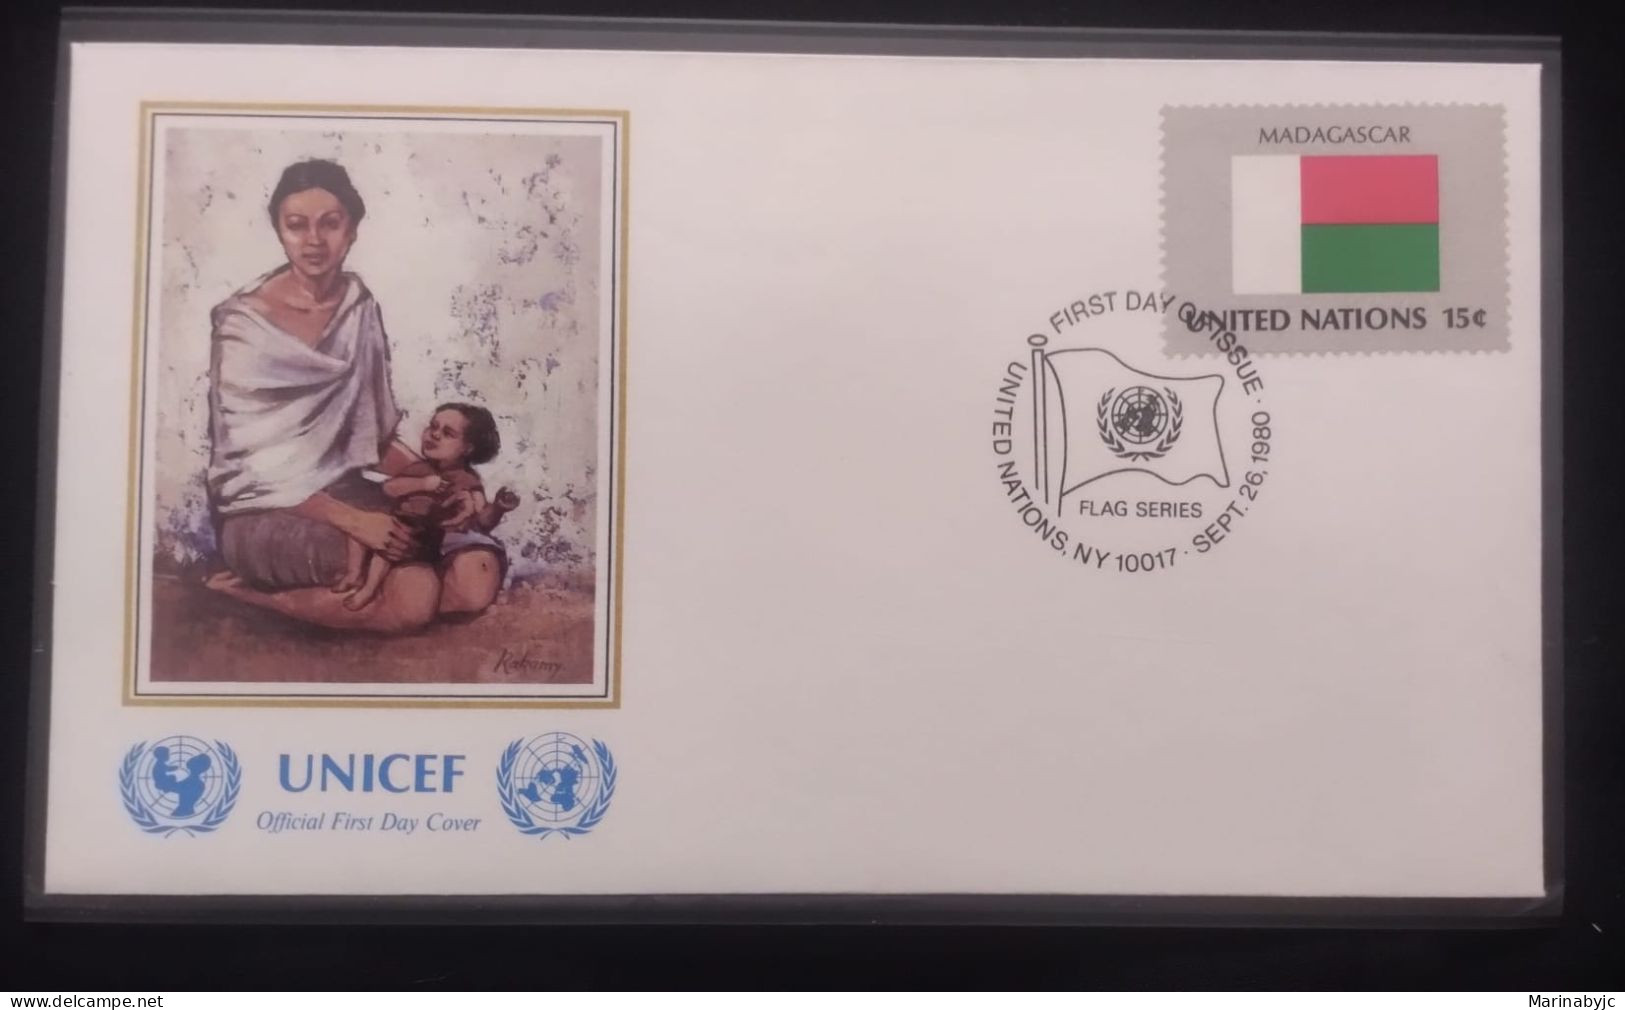 EL)1980 UNITED NATIONS, NATIONAL FLAG OF THE MEMBER COUNTRIES, MADAGASCAR, UNICEF, MOTHER AND BABY, FDC - Neufs